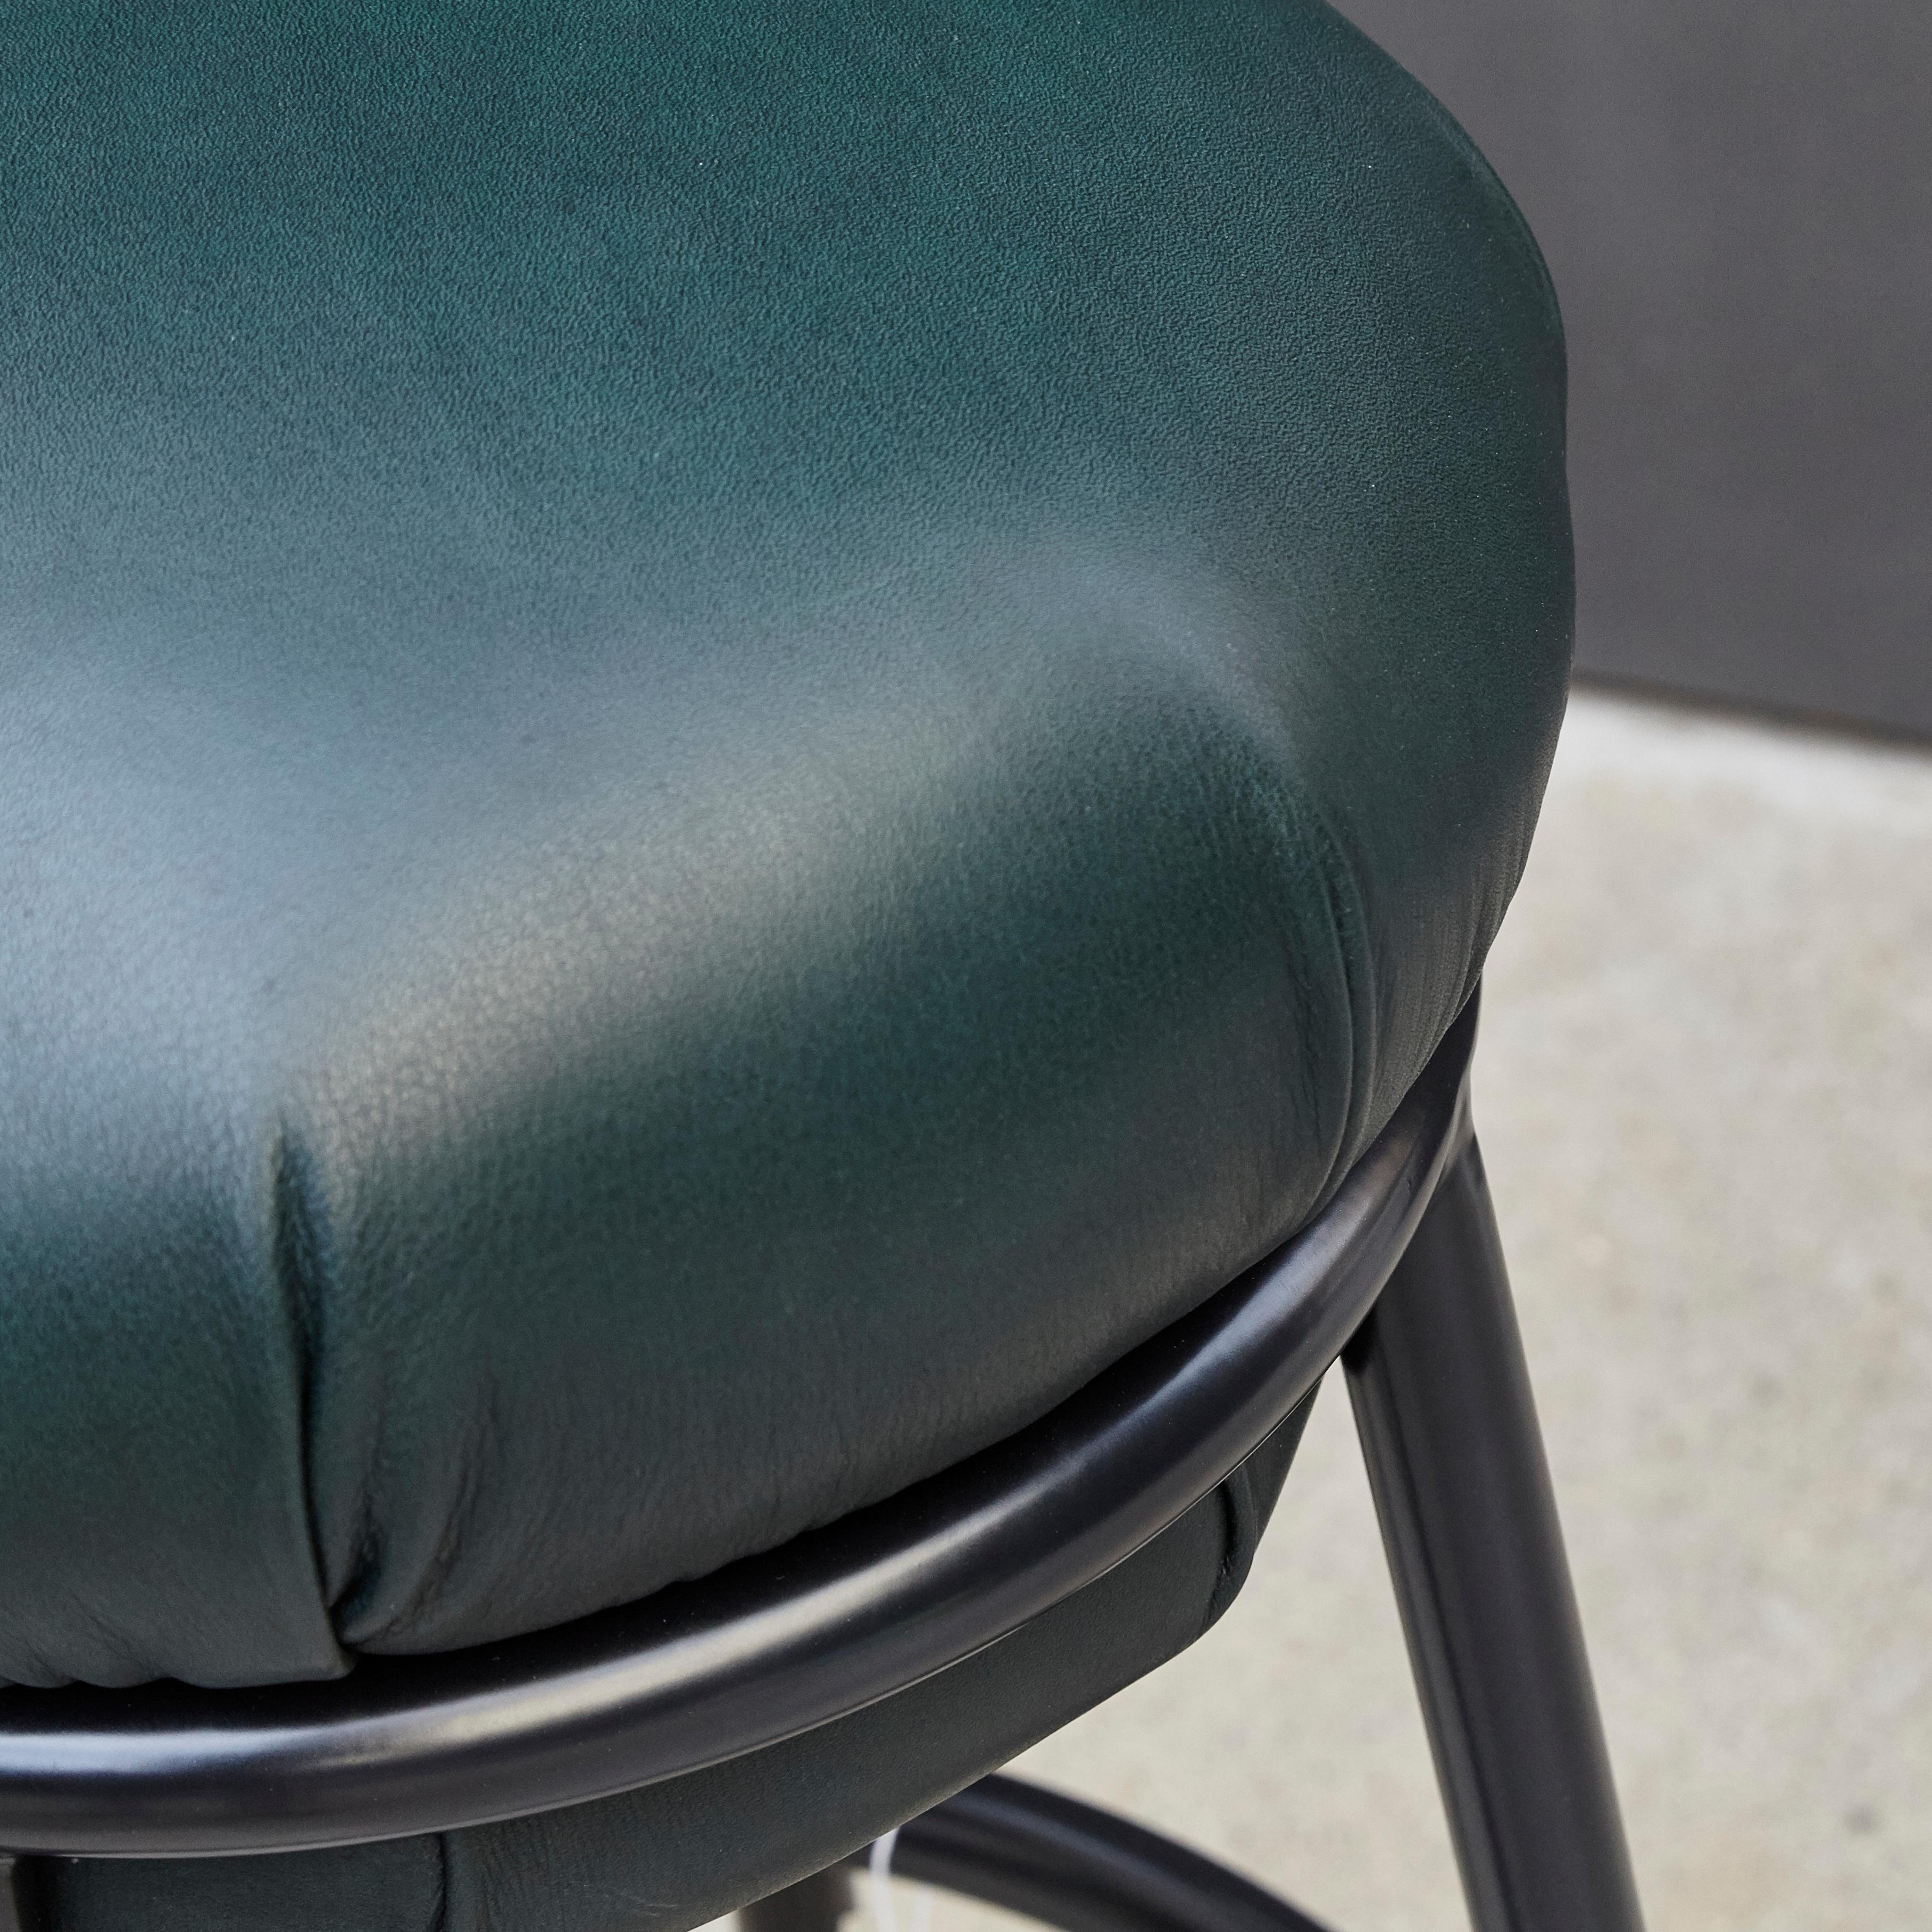 Iron Stephen Burks Grasso Green Leather, Black Lacquered Metal Stool For Sale